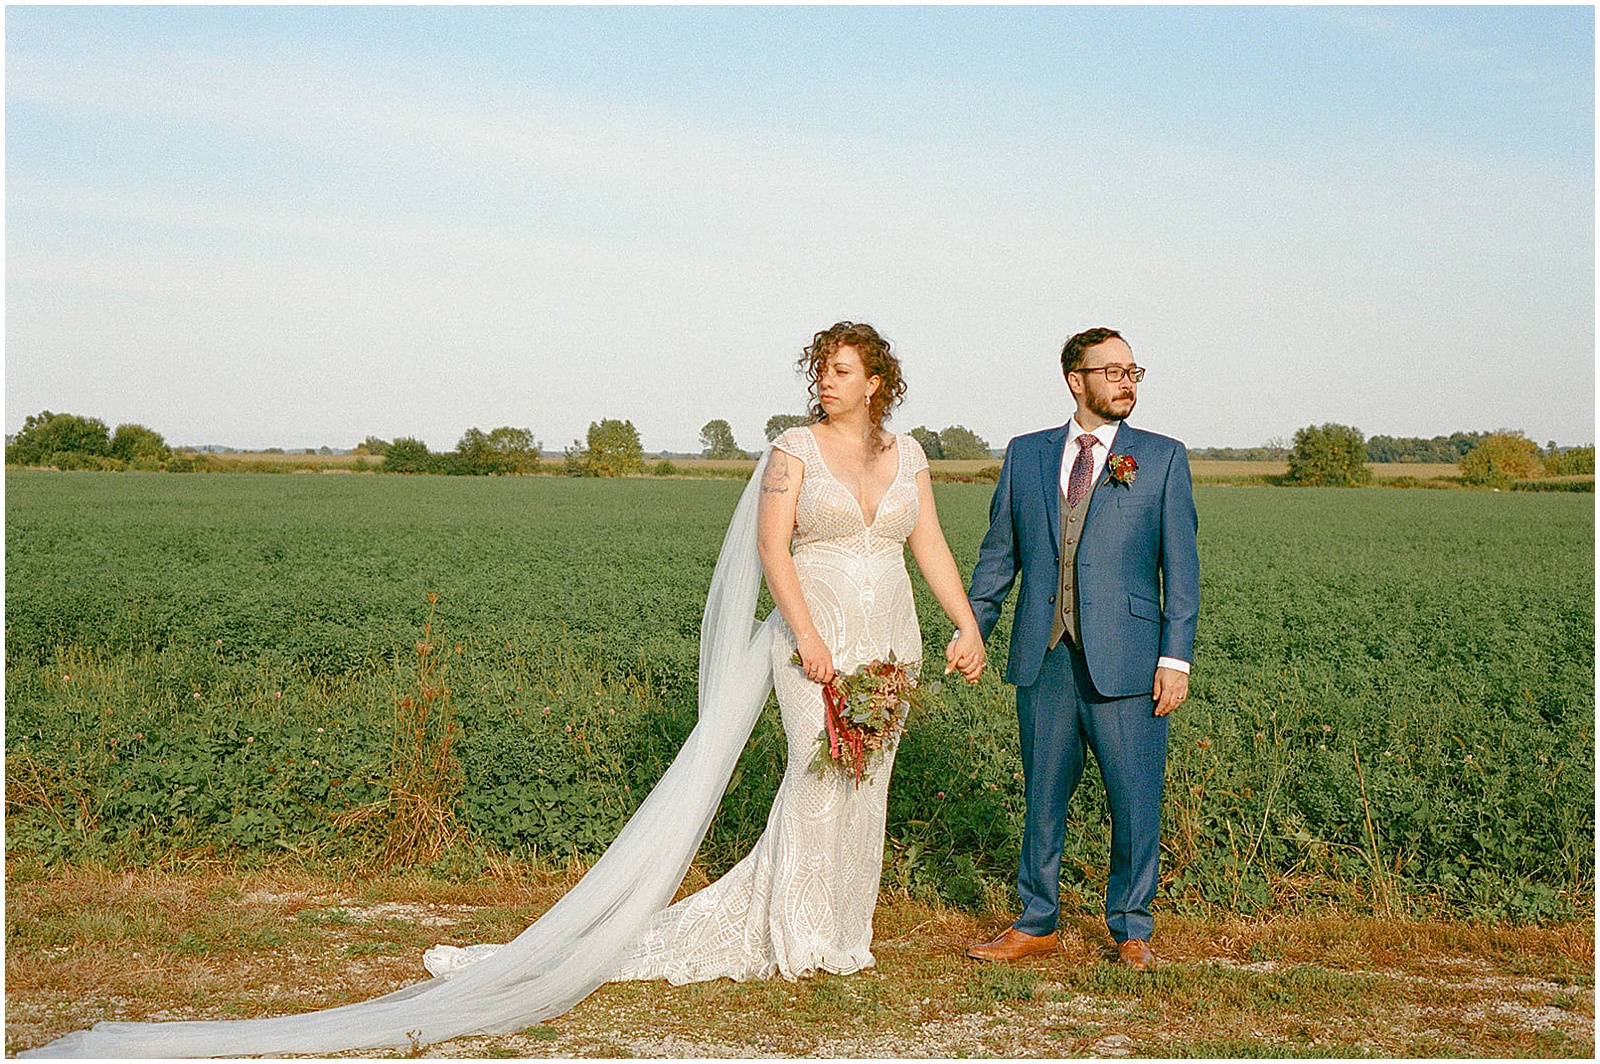 A bride and groom in a field pose for film wedding photography.